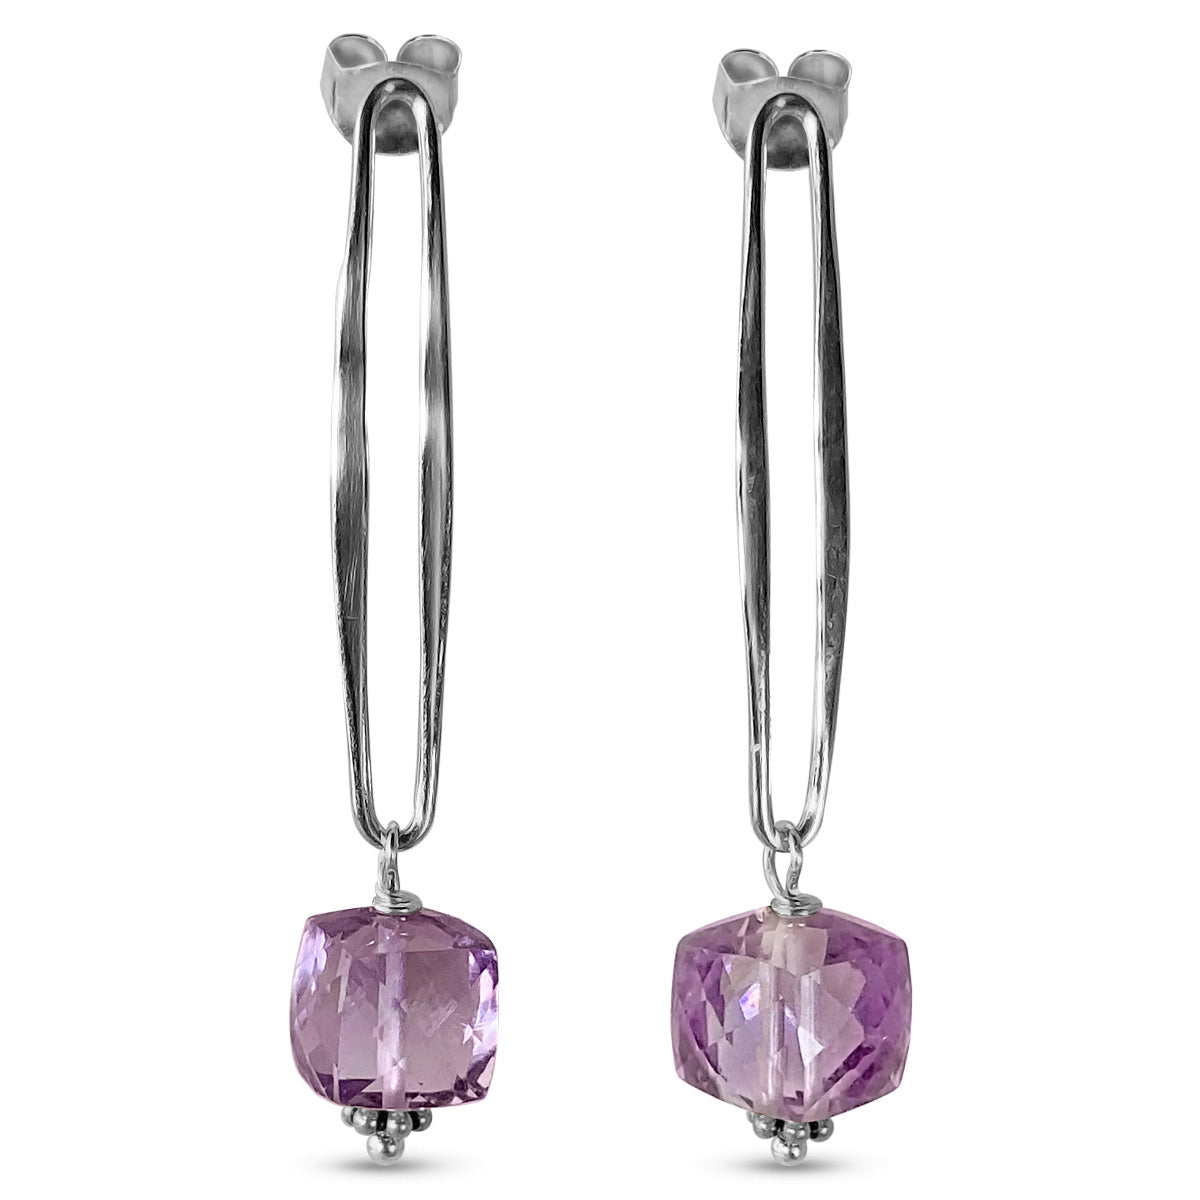 Square "AAA" Faceted Amethyst Earrings